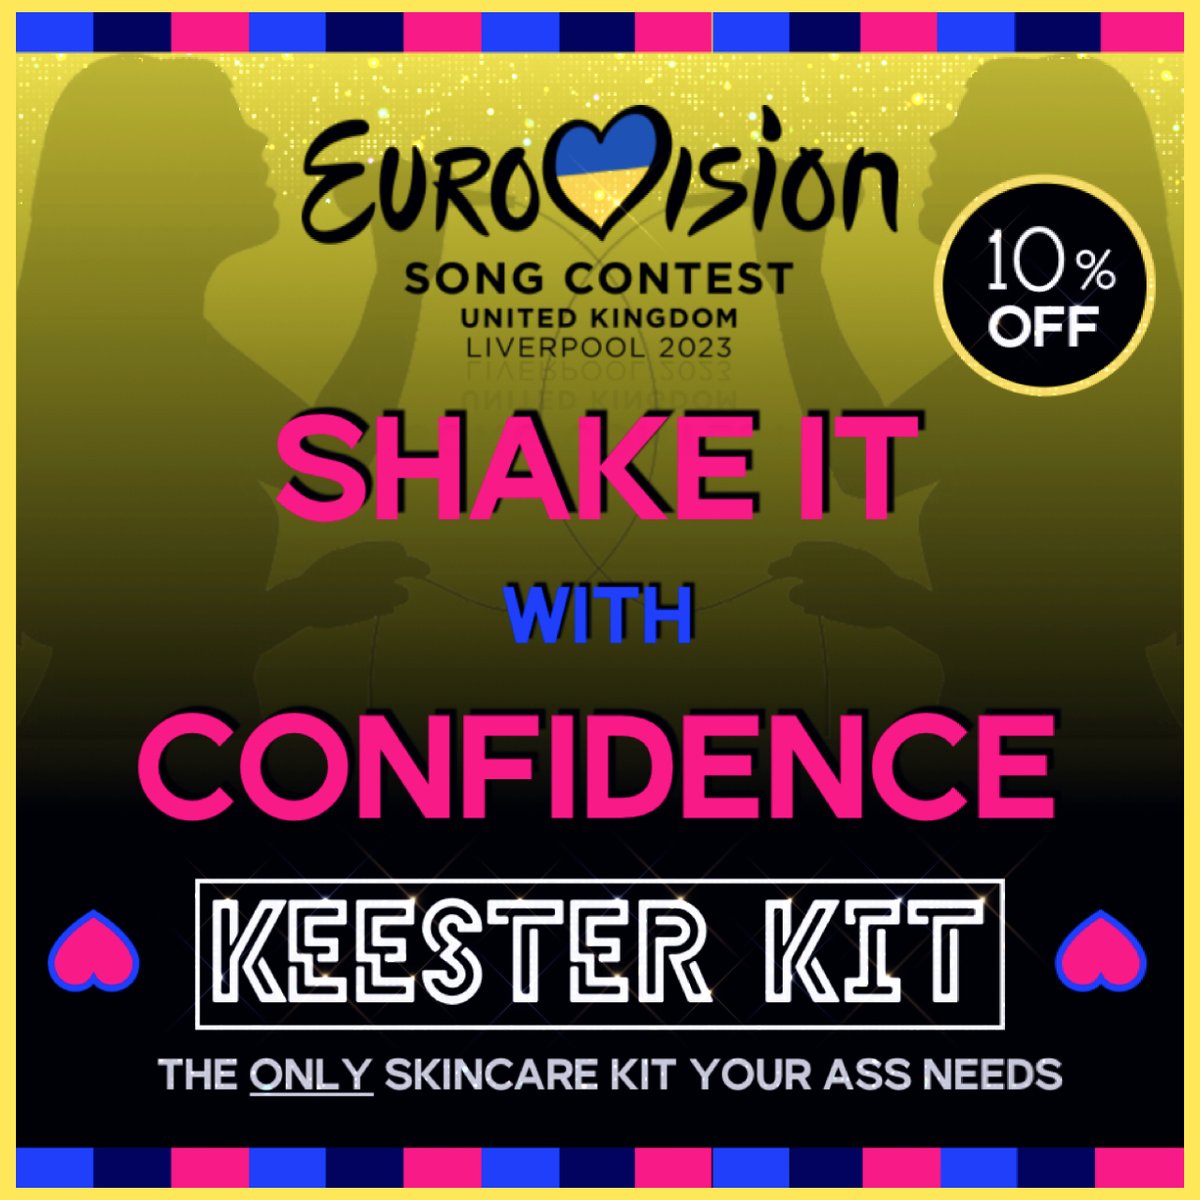 Shake It At Its Best 🍑 with Keester Kit - at least 10% OFF! #eurovision #eurovisionsongcontest #gay #homo #gayuk #lgbtq #lgbtq🌈 #lgbtqpride #pride #summer #skincare #feelyourbest #bodyconfidencemovement #bodyimage  #equality #veganuk #beauty #skincareroutine #deals #liverpool